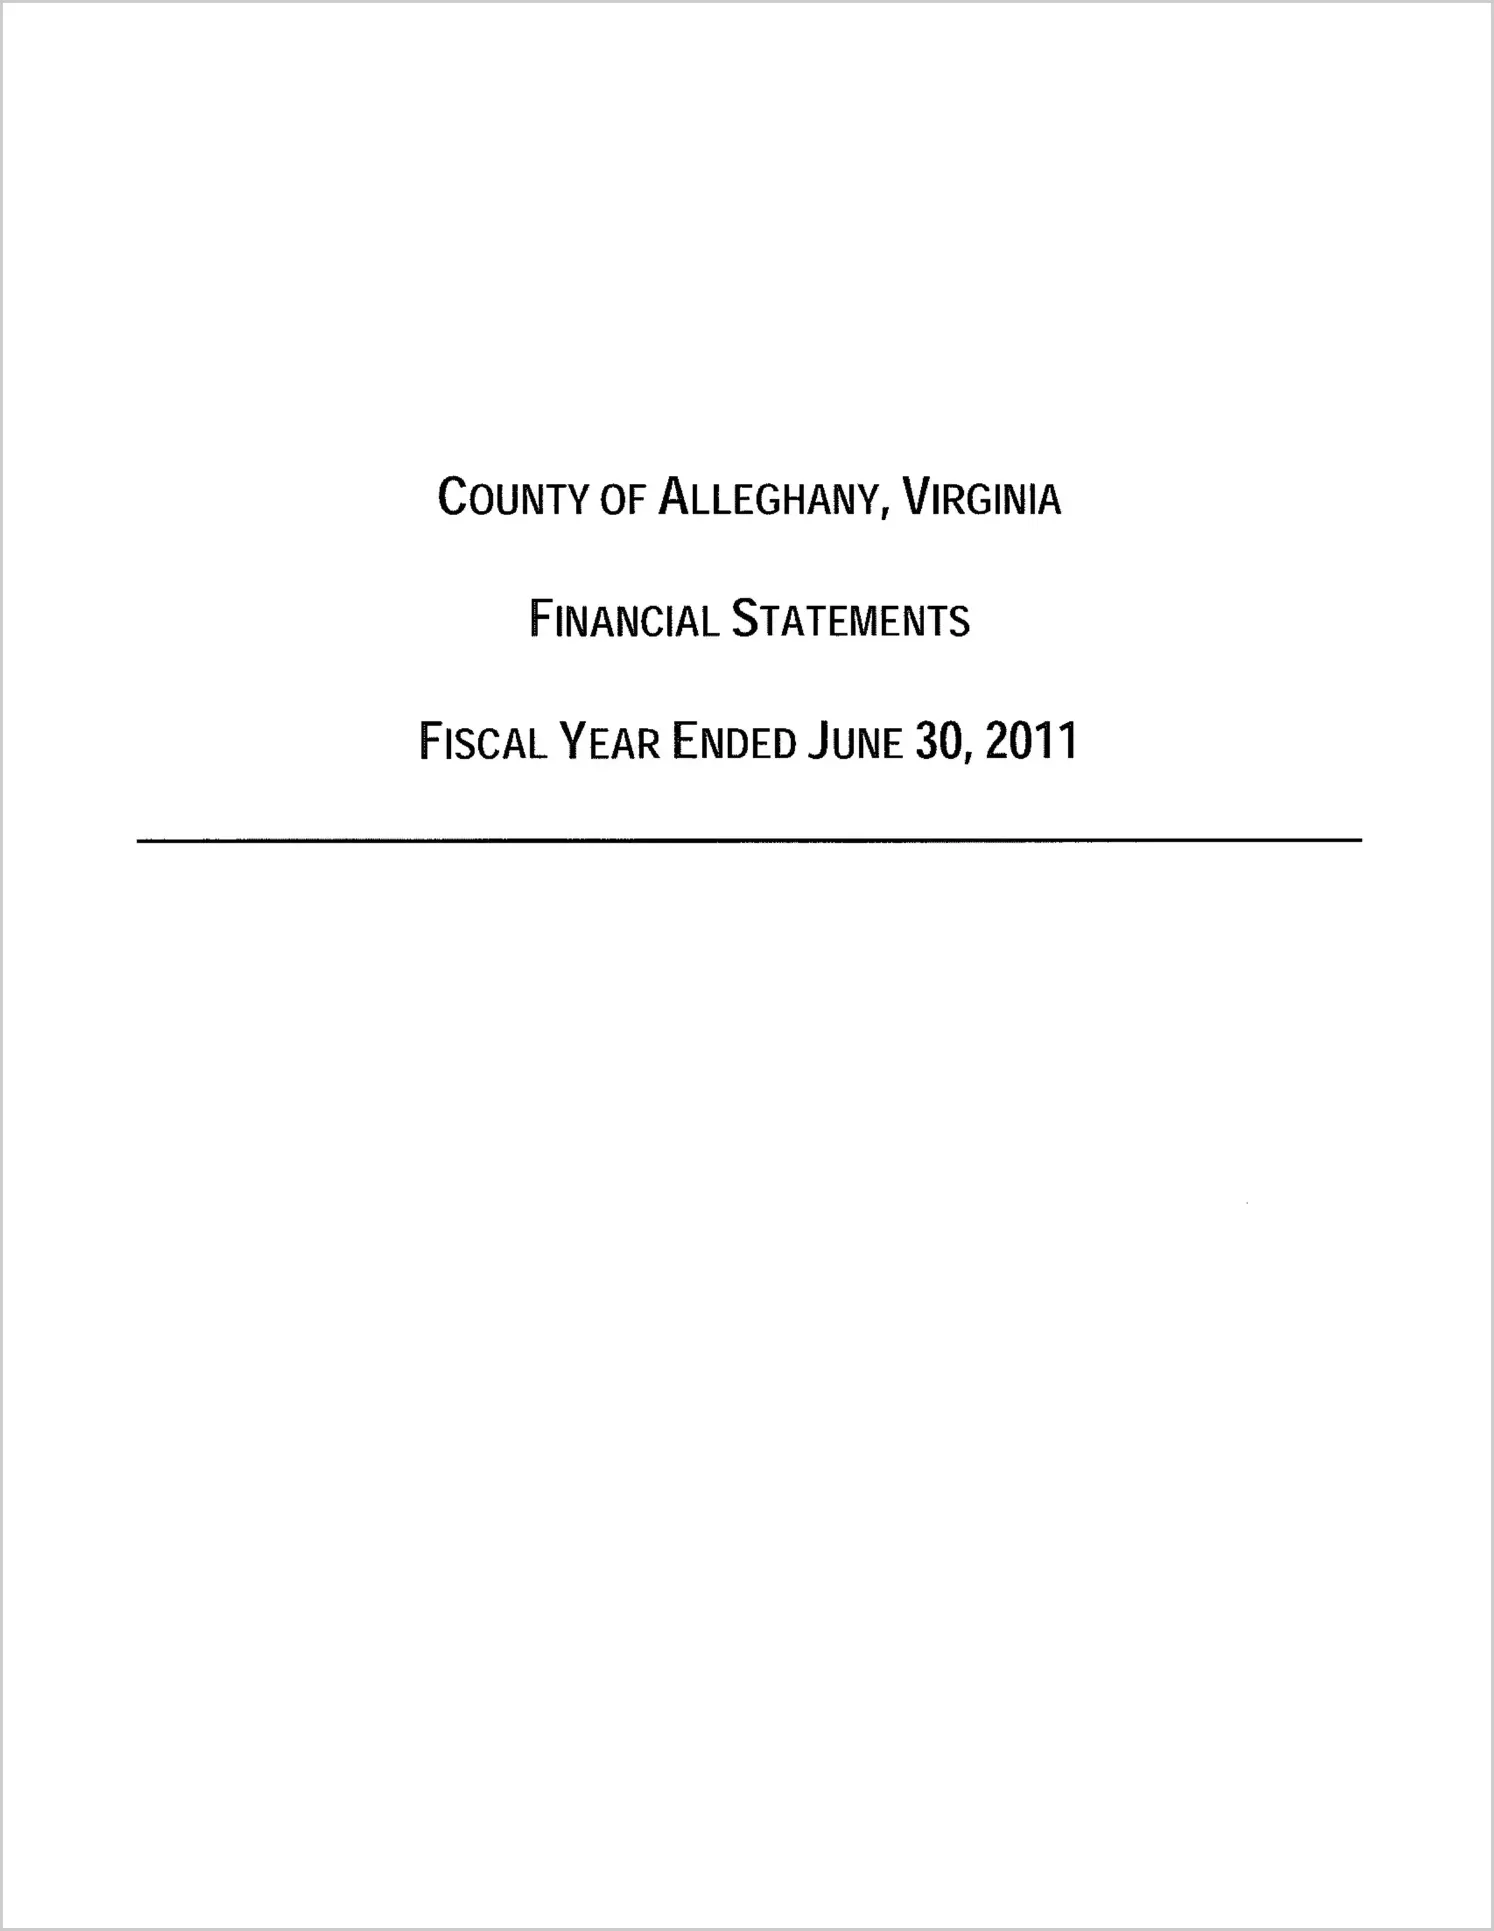 2011 Annual Financial Report for County of Alleghany